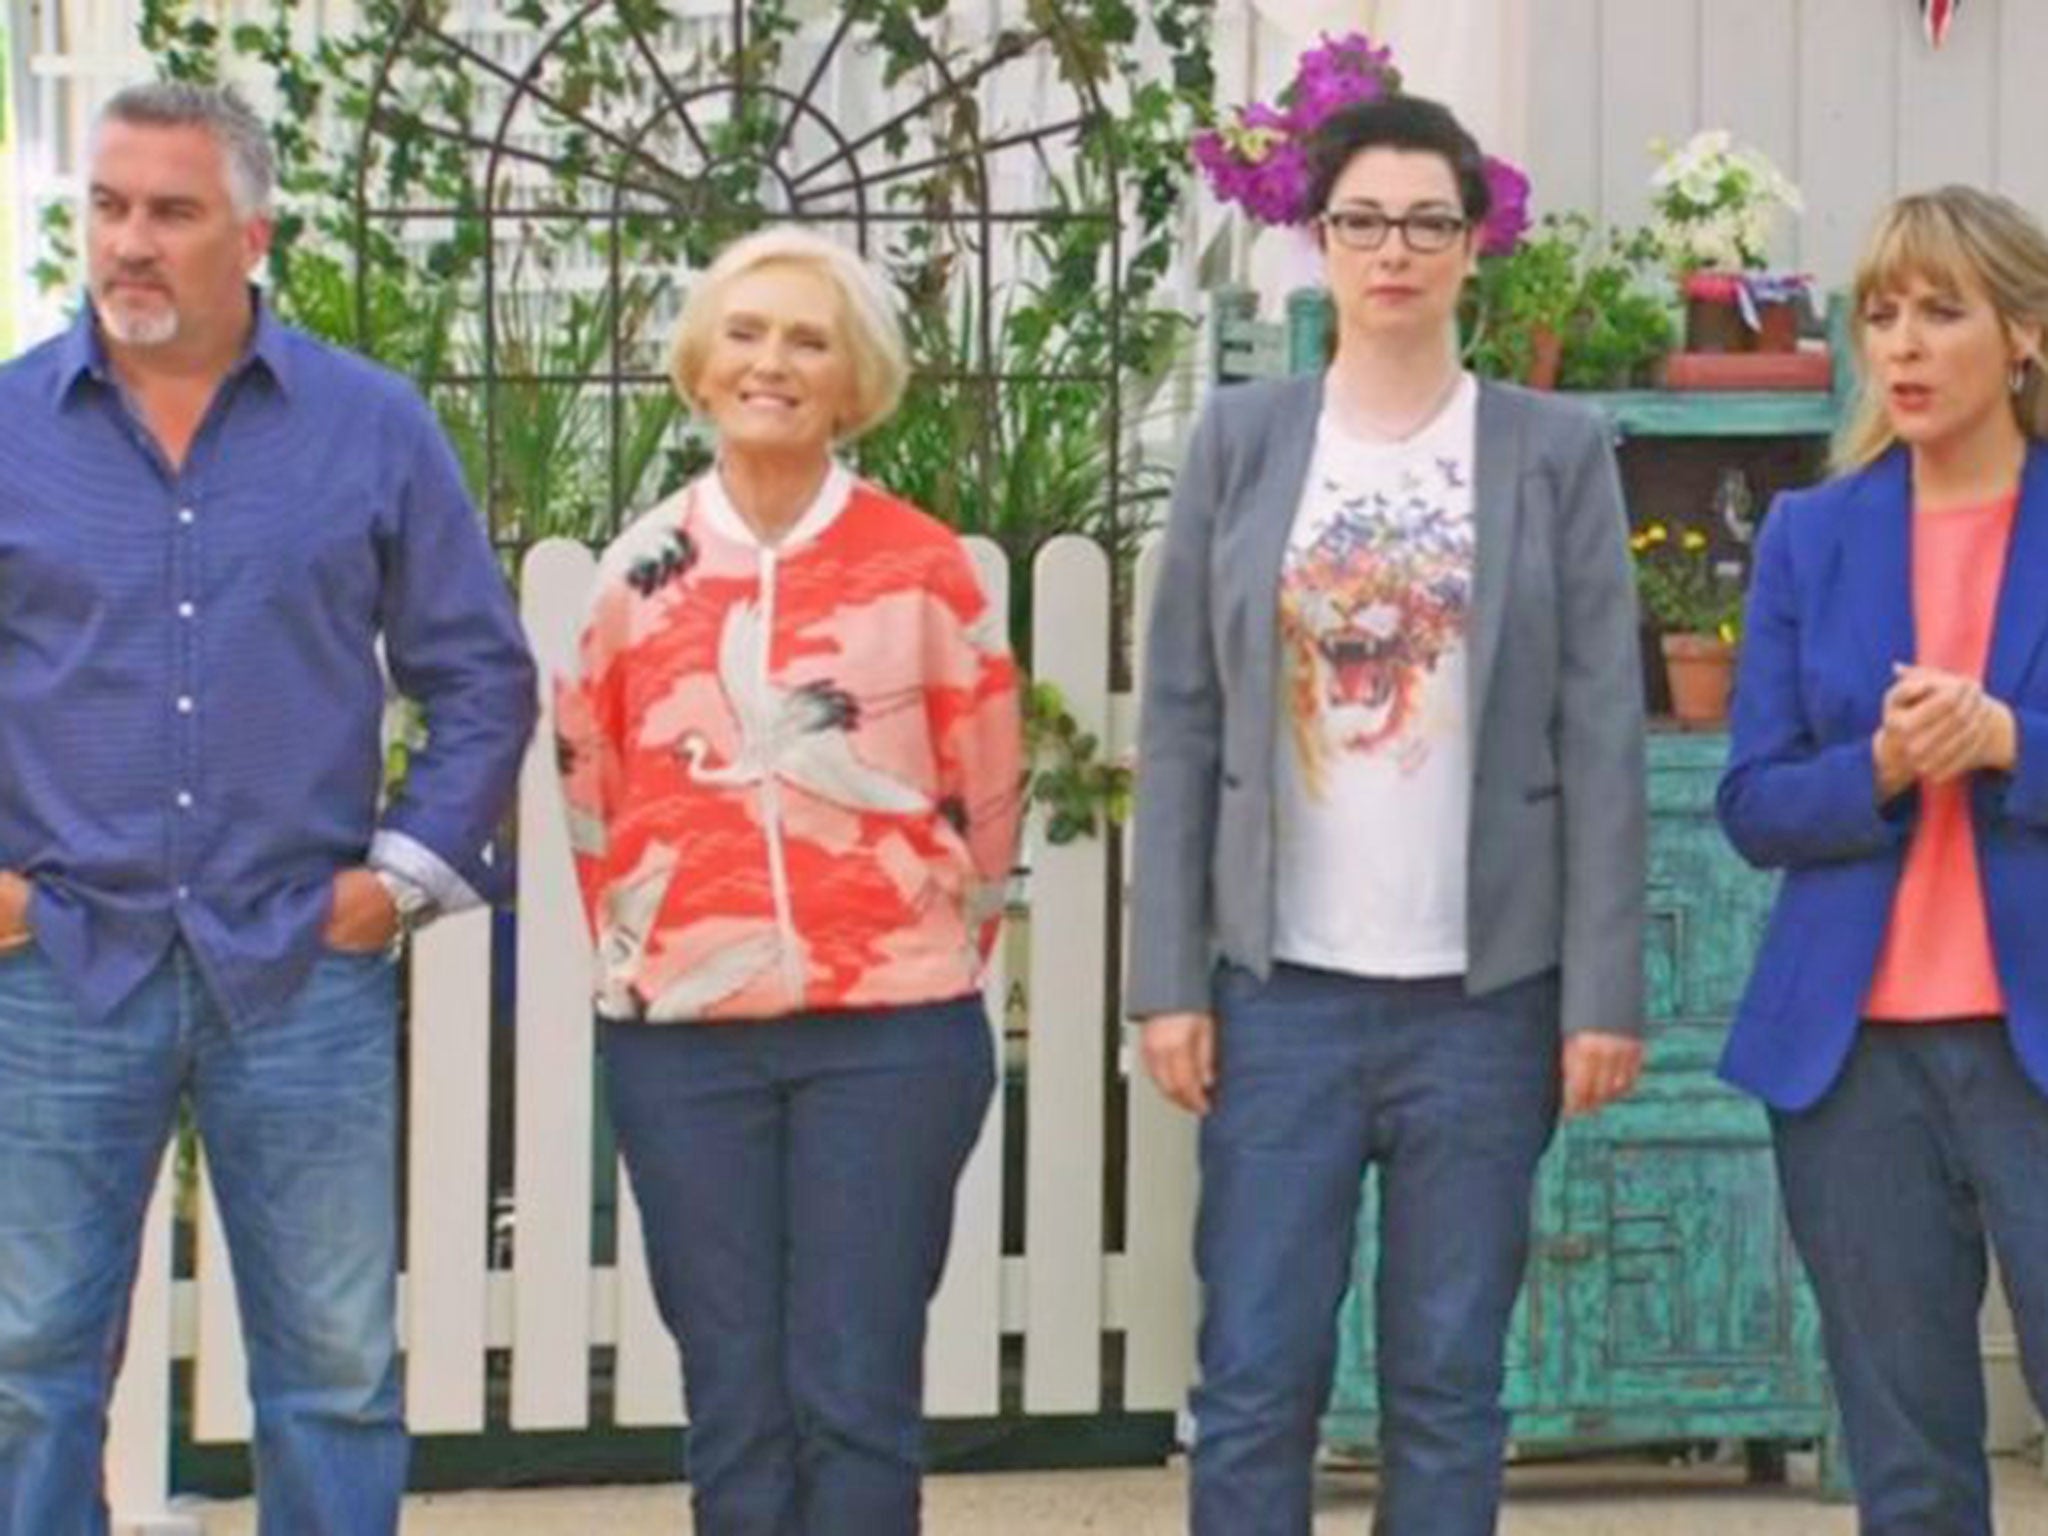 Mary Berry alongside fellow judge and presenter on last night's episode, wearing a Marks and Spencer bold bomber jacket Great British Bake Off team